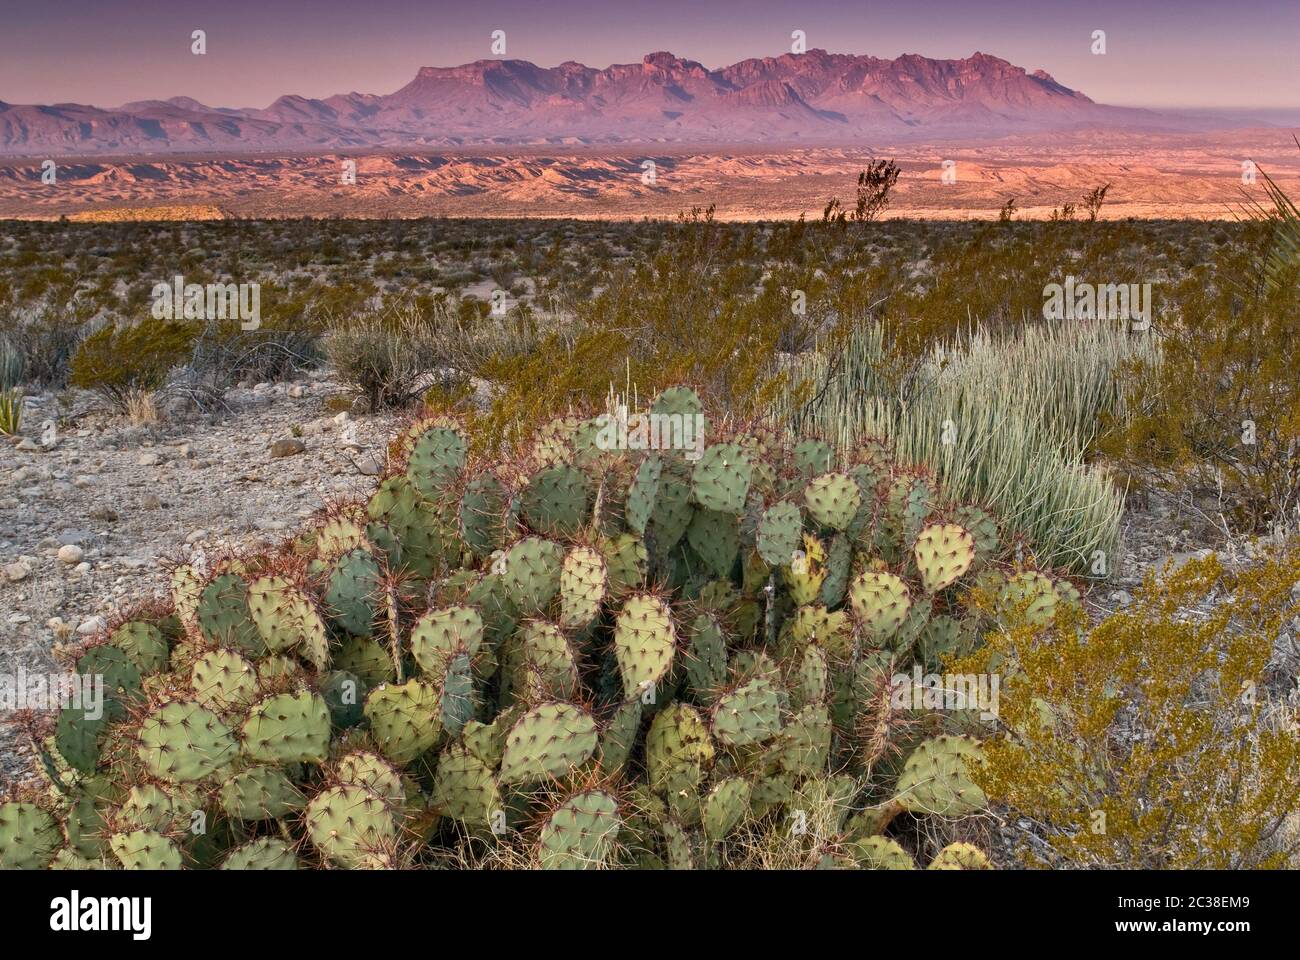 Chisos Mountains in distance at sunrise, prickly pears, lechuguilla agaves and creosote bushes, Old Ore Road, Big Bend National Park, Texas, USA Stock Photo